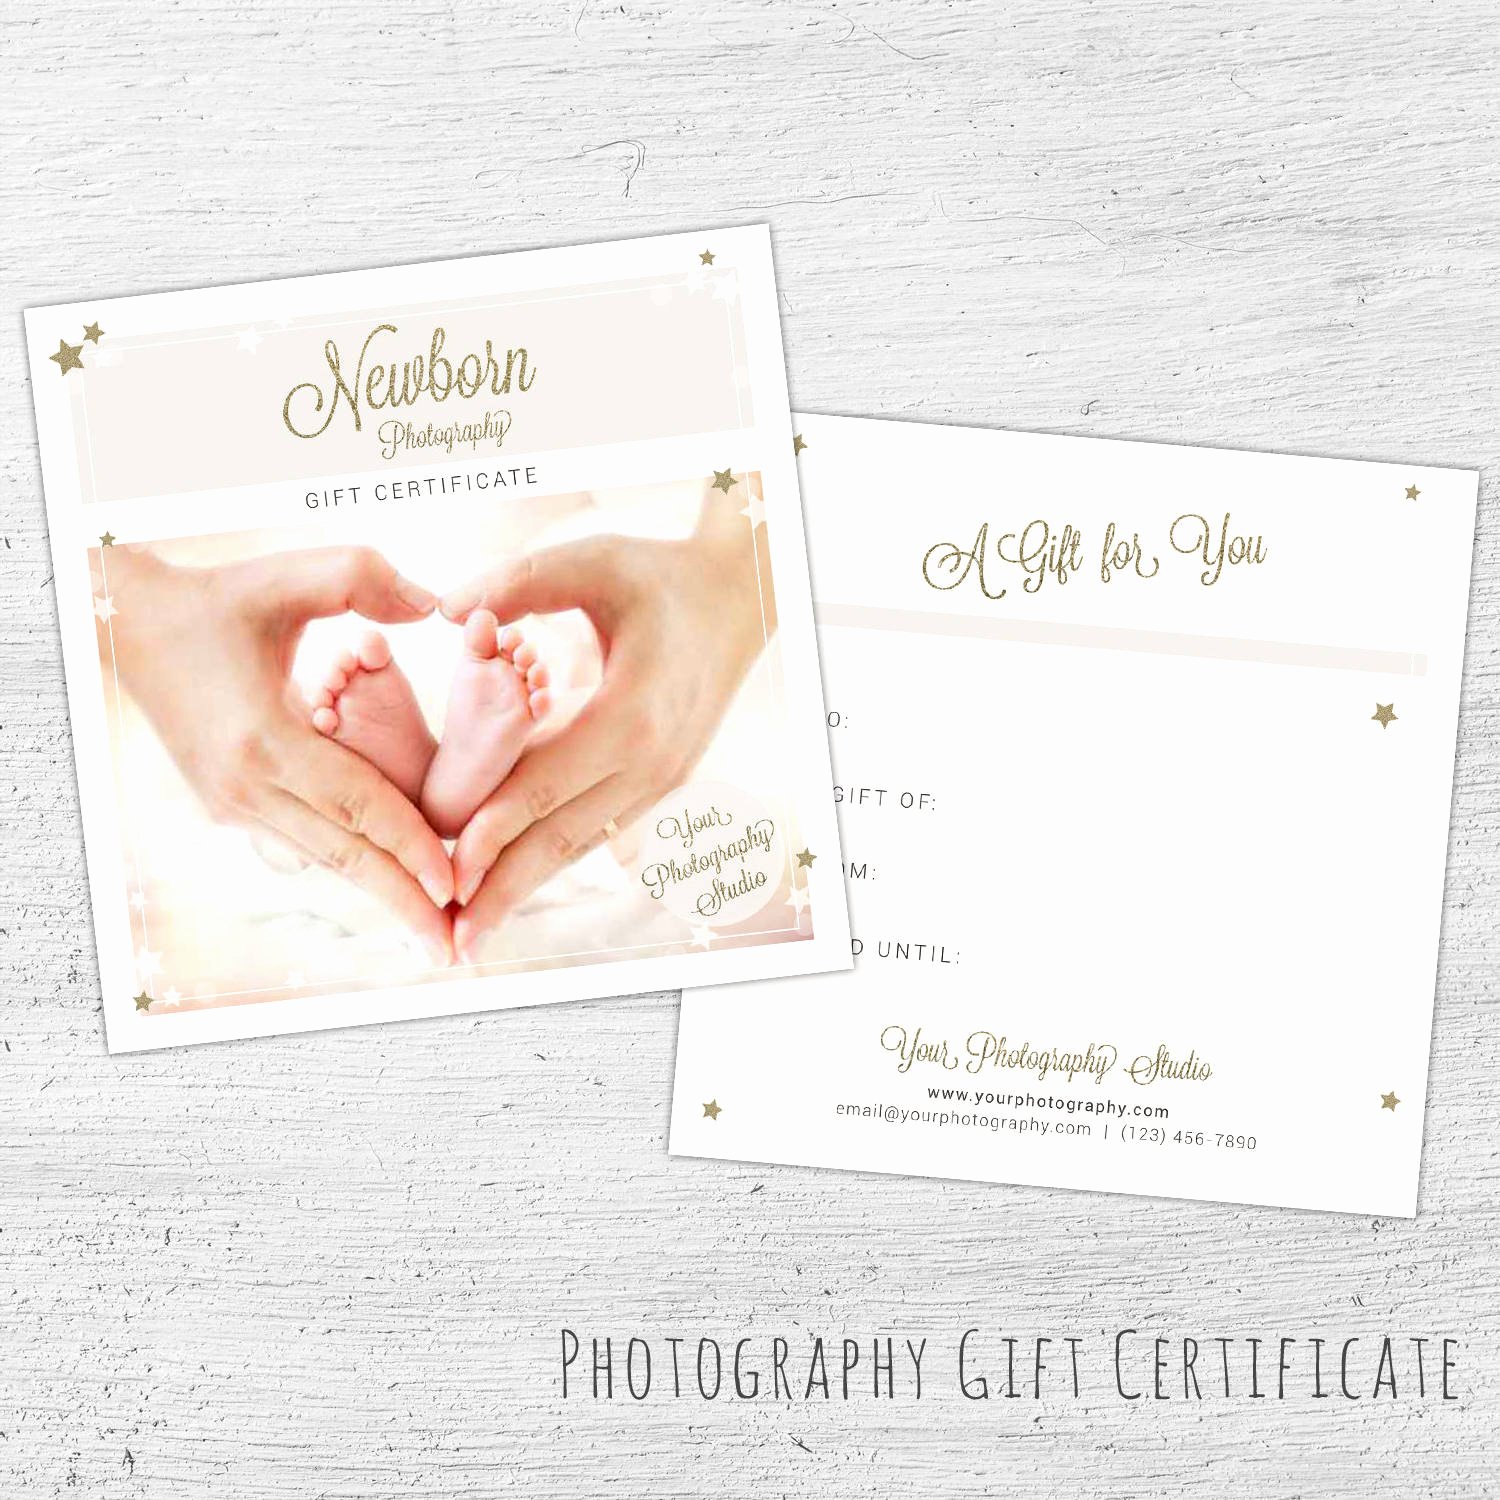 Gift Certificate Template Photography Elegant Graphy Gift Card Template Newborn Graphy Gift